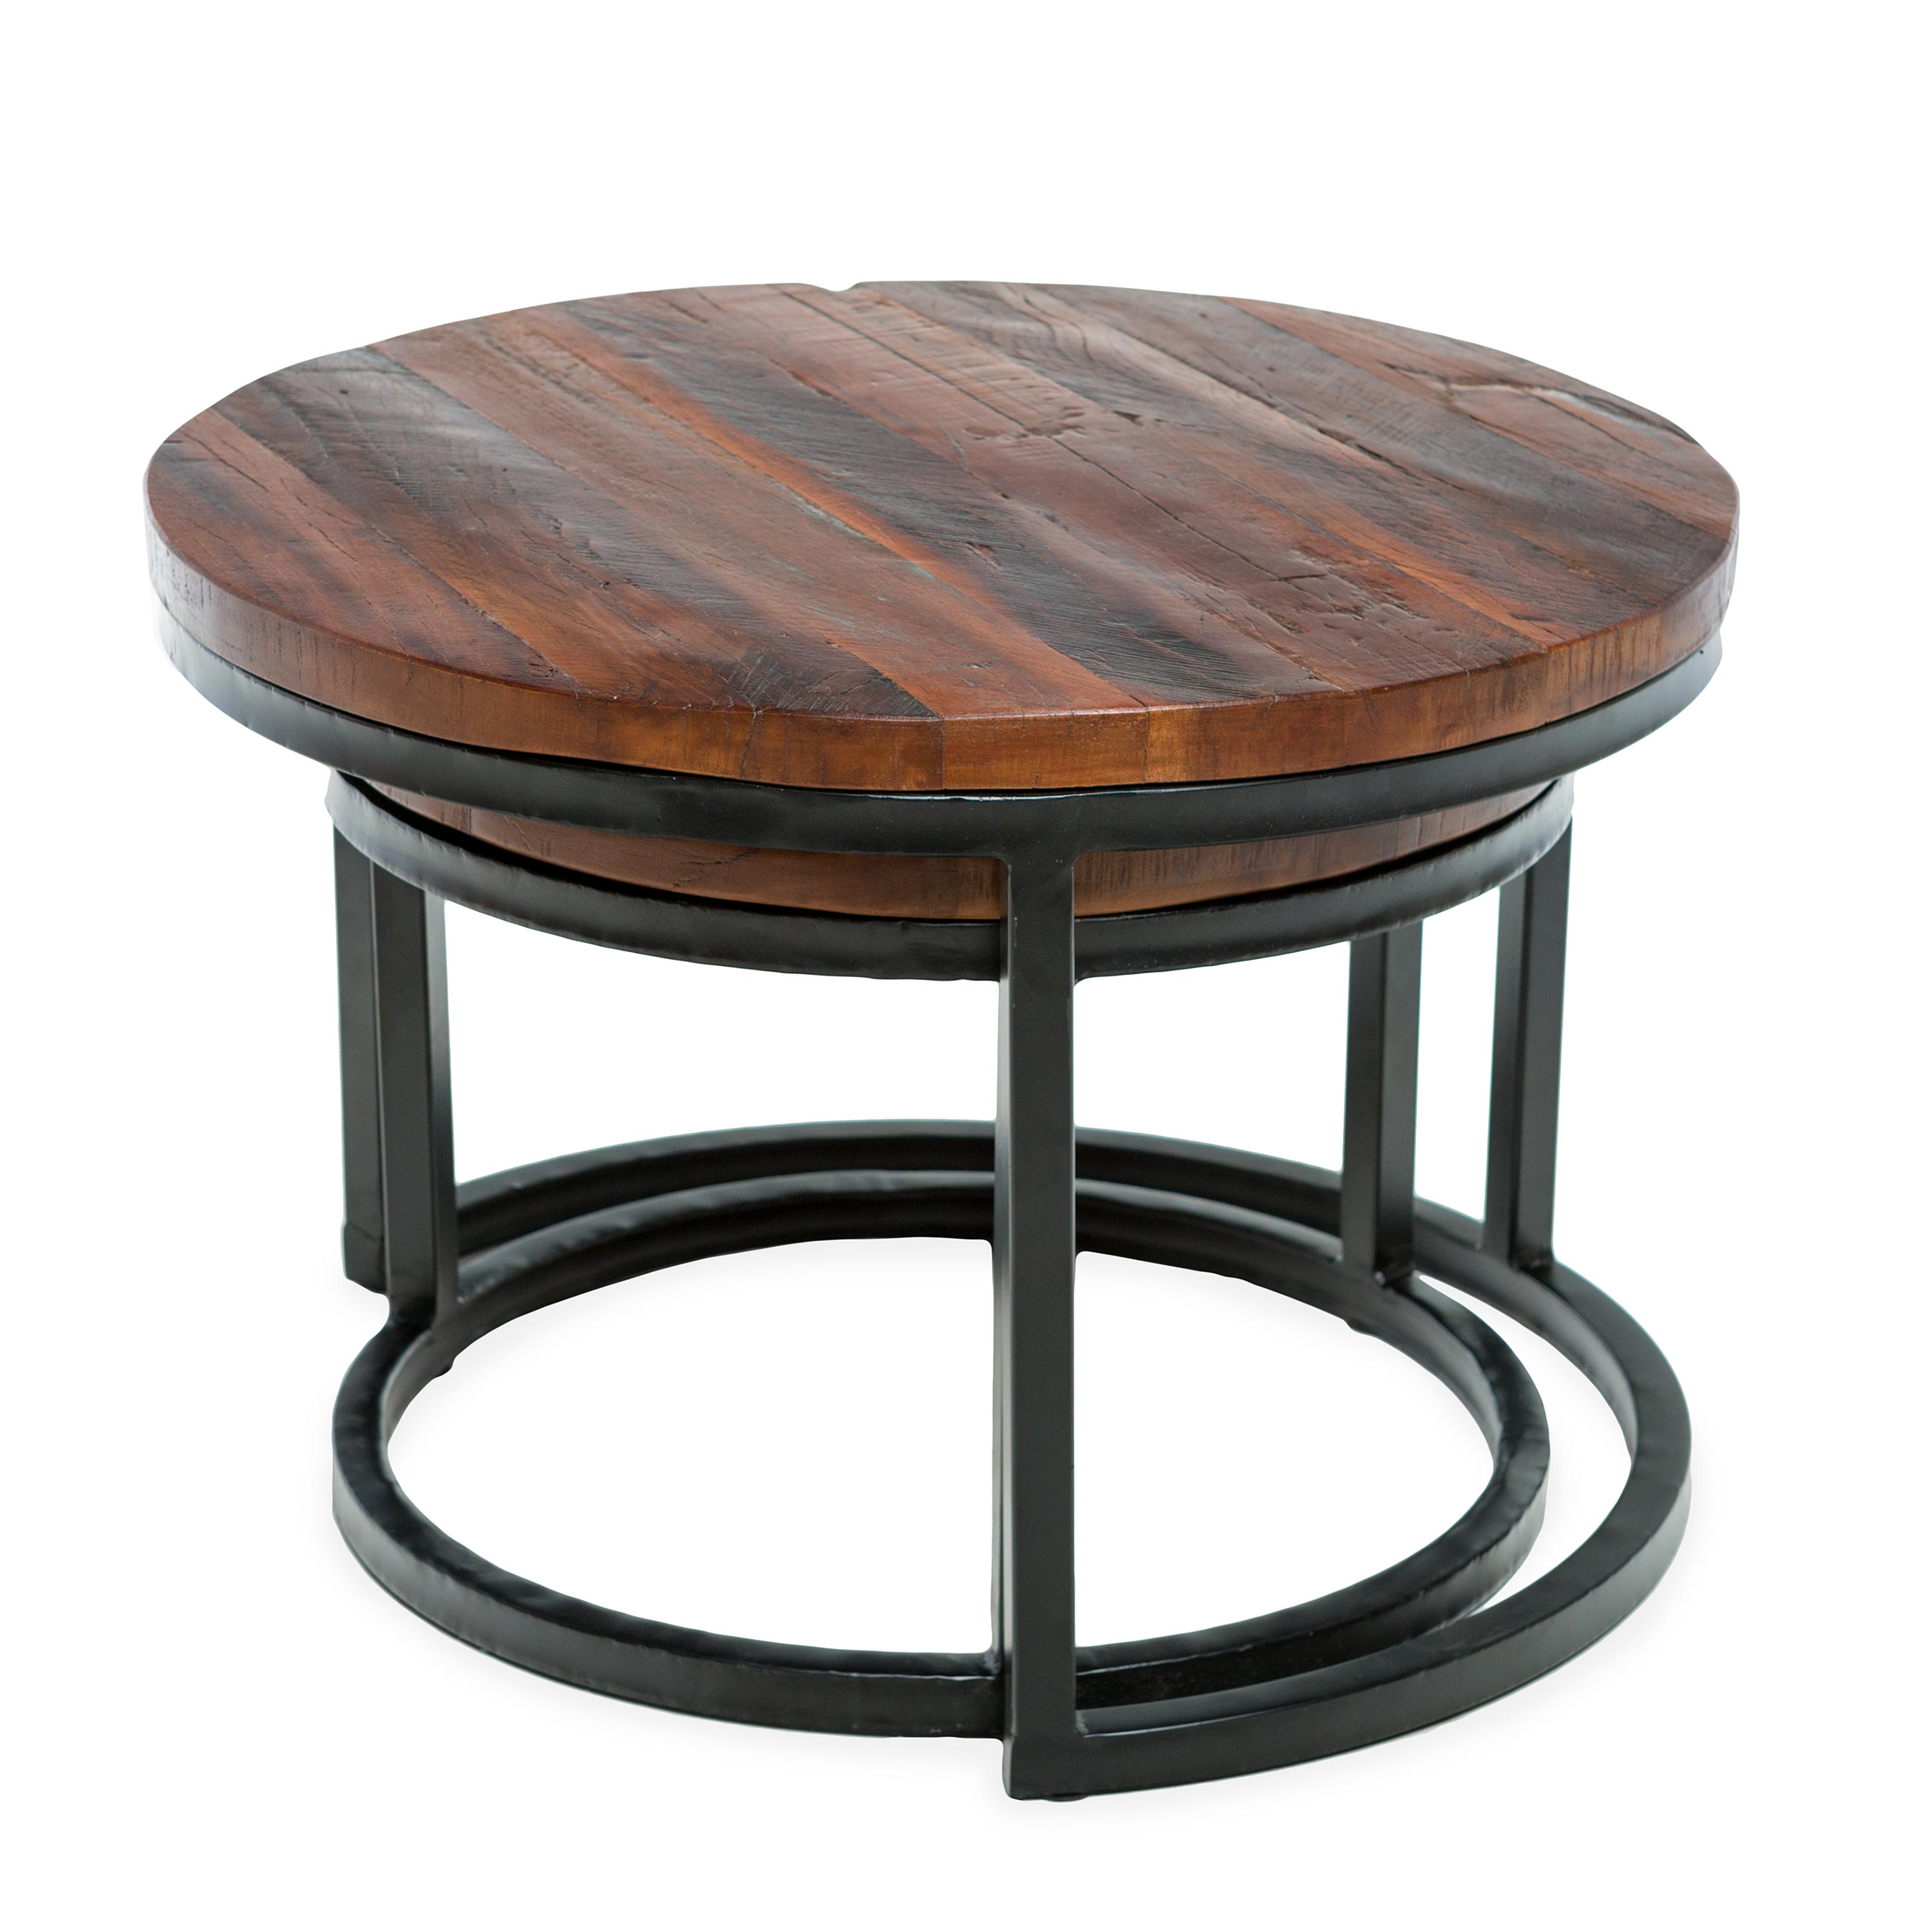 Allegheny Reclaimed Wood Round Nesting Tables, Set of 2